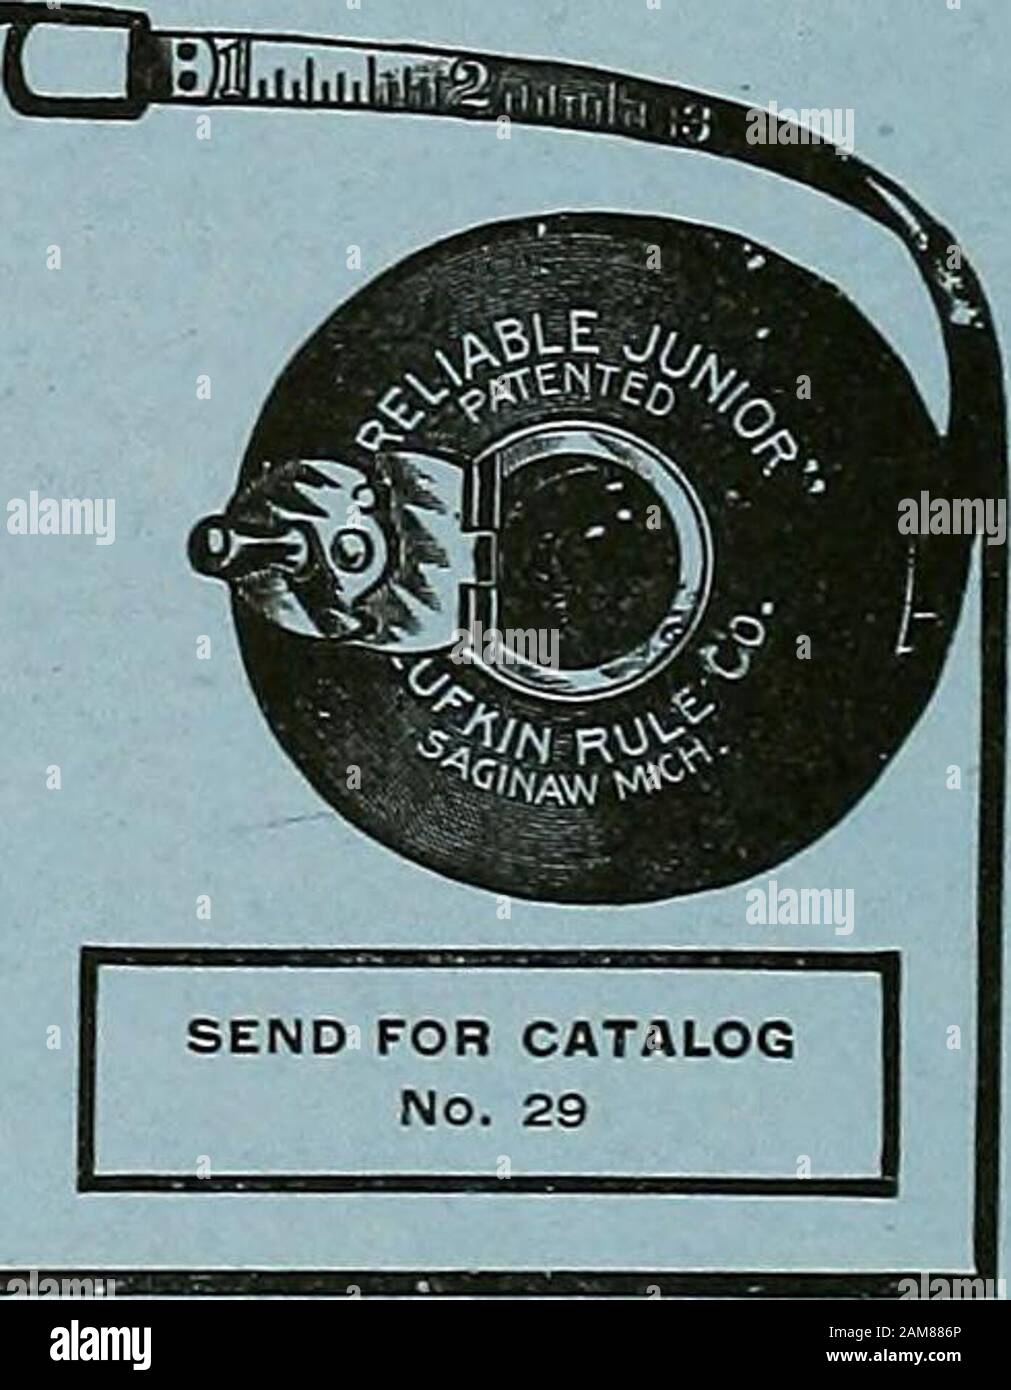 Carpenter . A great advantage for overhead ^vork or where only one hand can be used. Takes all the Attachmentsused in No. 30. Send for Tool Book. Tells you about 35 styles and 75 sizes. A postal brings it. Your dealer sells **Yankee Tools. NORTH BROS. MFG. CO., Fairhill Sta. Philadelphia, Pa. /UFKiN Measuring Tapes and Rules ARE DEMANDED BY WORKMEN OF EXPERIENCEEvery test proves them Auperior to all others. A trial will coDvince you TH£/l/F/ffN/fl/LE(^0. SAGINAW MICH., U. S. A. LONDON,ENG. WtNDSOR. CAN.. trrw sTtrjirr! wo no^ Fred T. Hodgson^ Author, Editor, Architect, known to every reader of Stock Photo